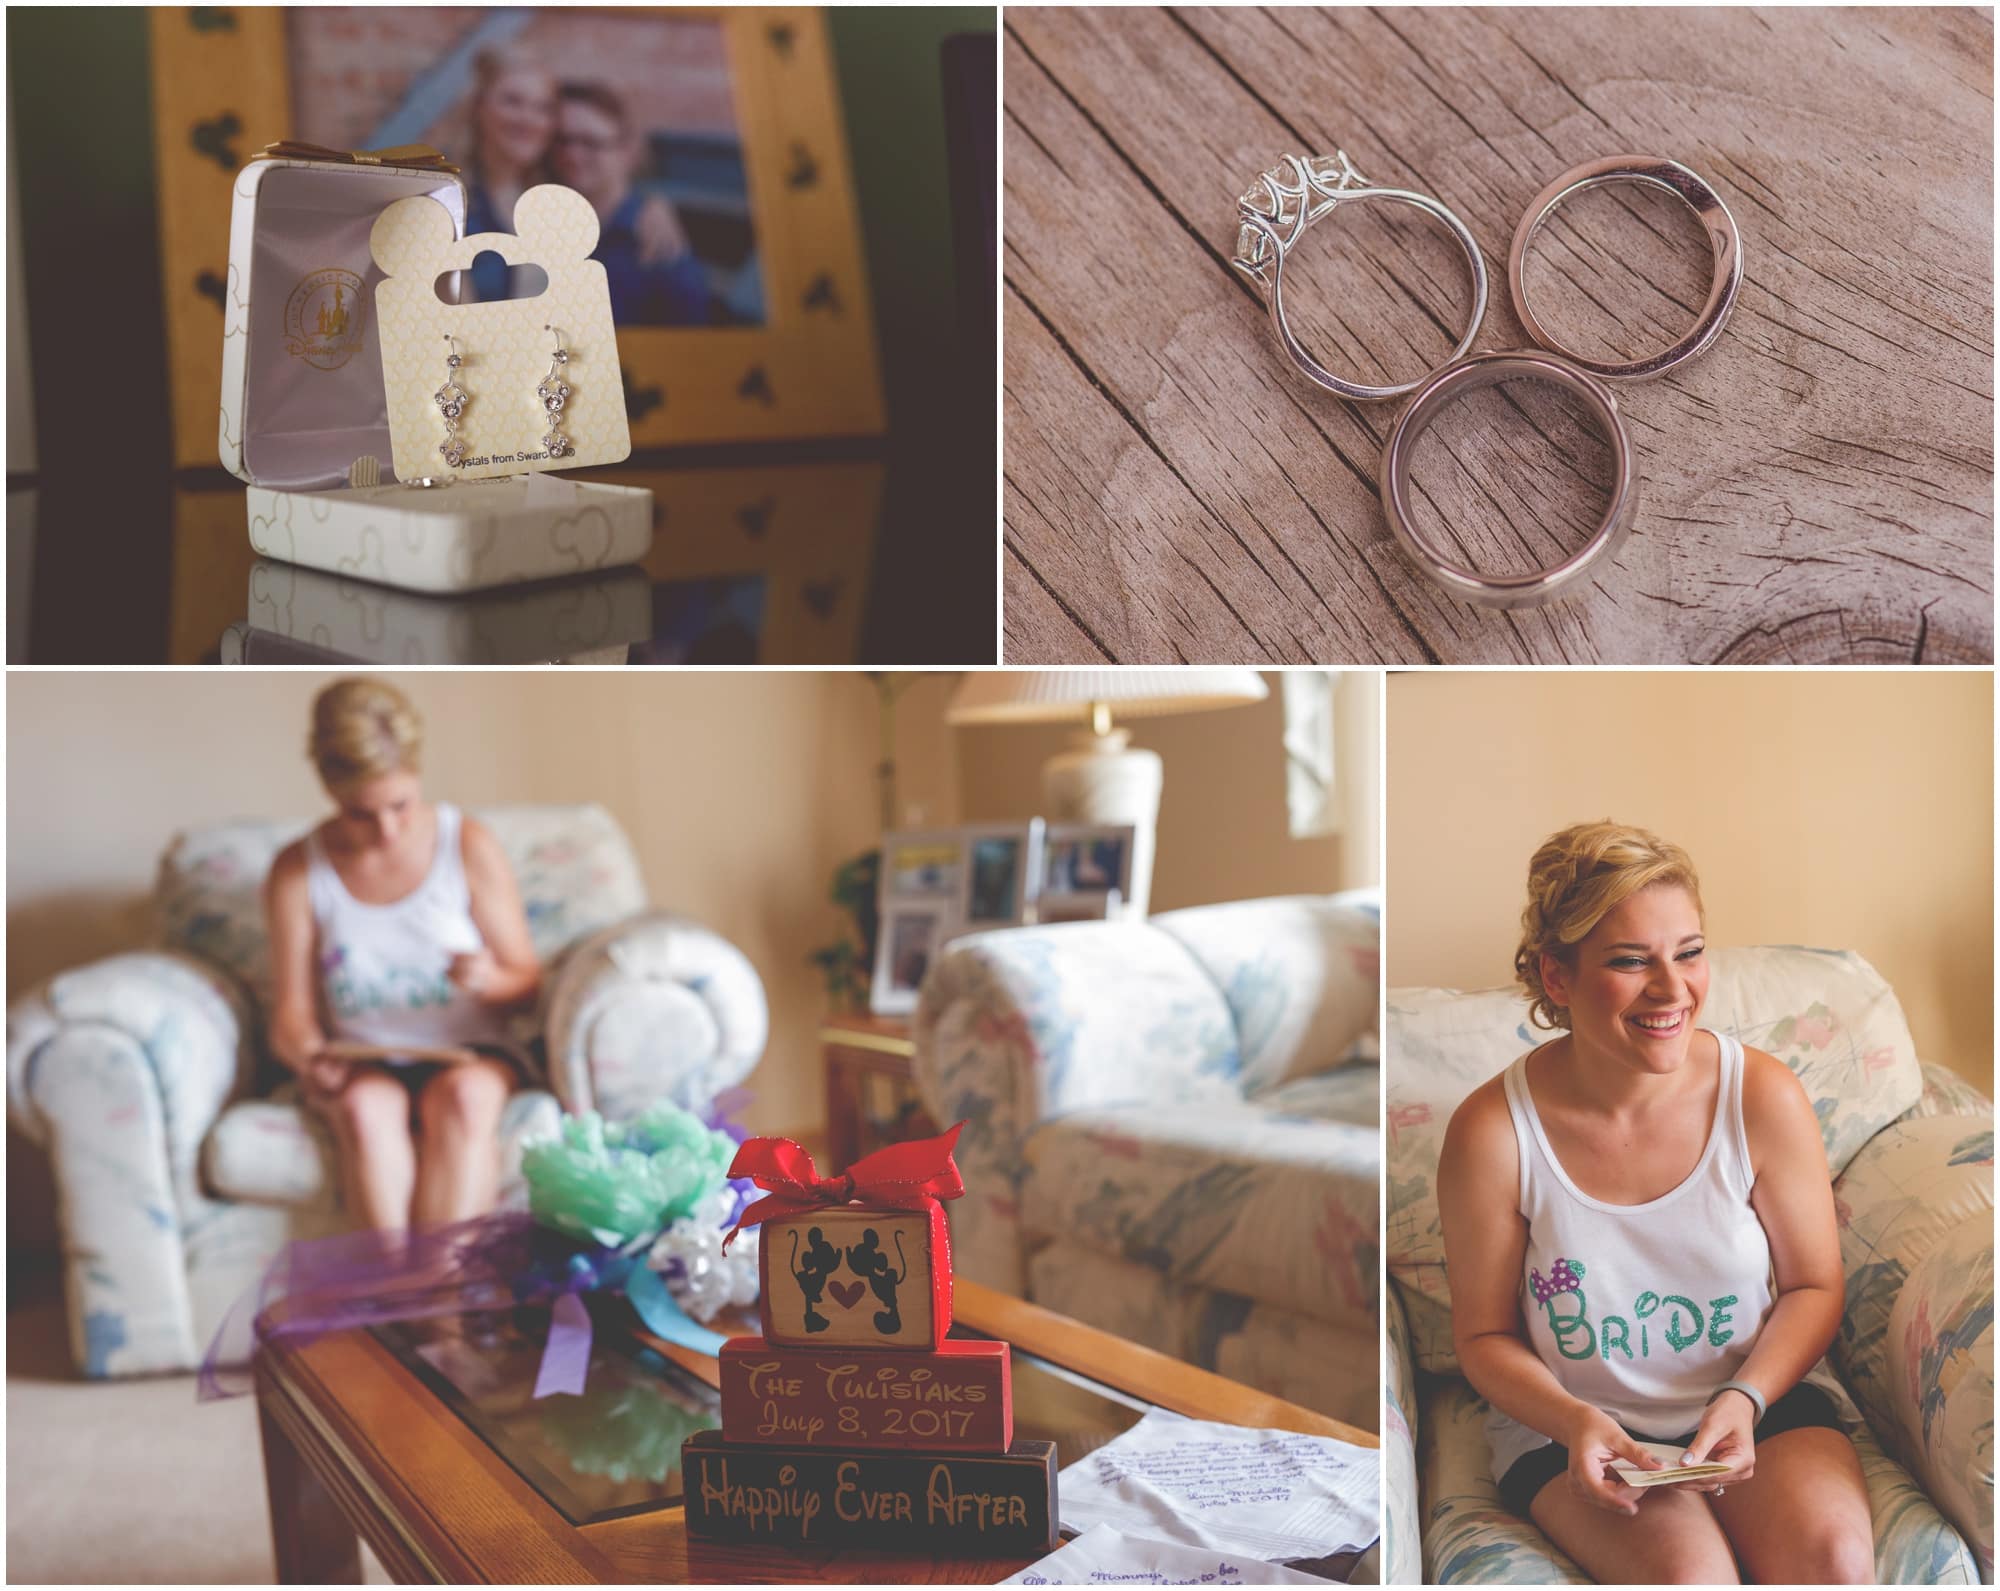 County Line Orchard Wedding Photographer Getting redsy details with bride including her love for all things disney, rings shot in shape of disney mickey mouse, jewelry from disney 